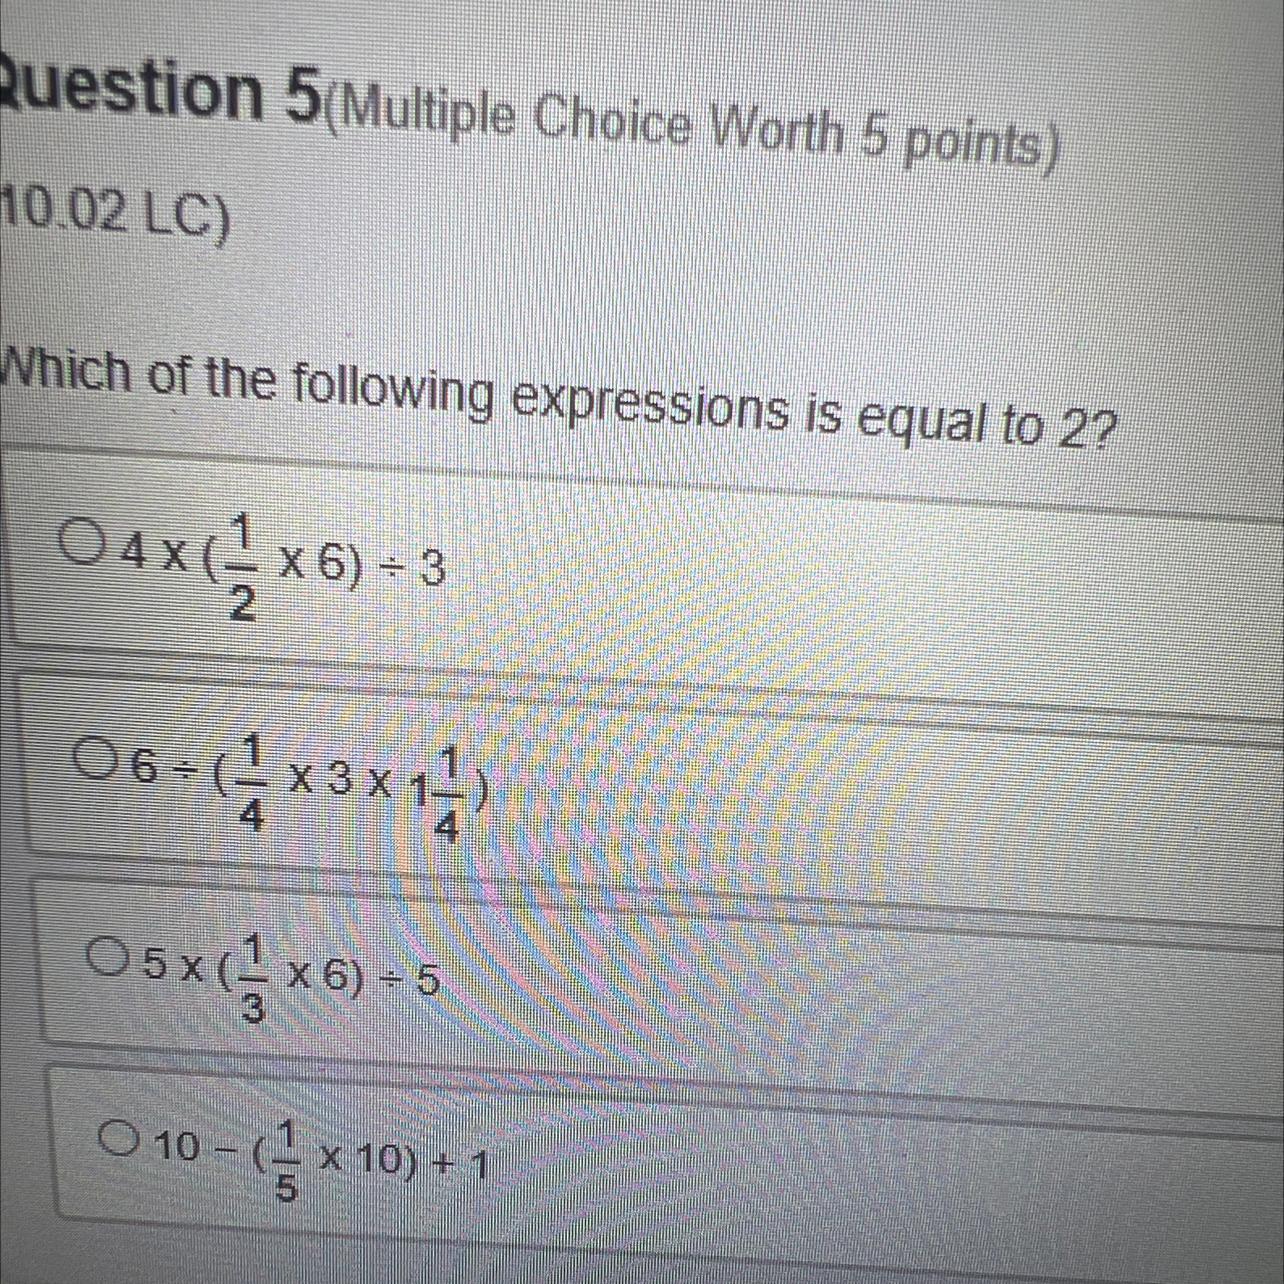 Please Help Which Of The Following Is Equal To 2?